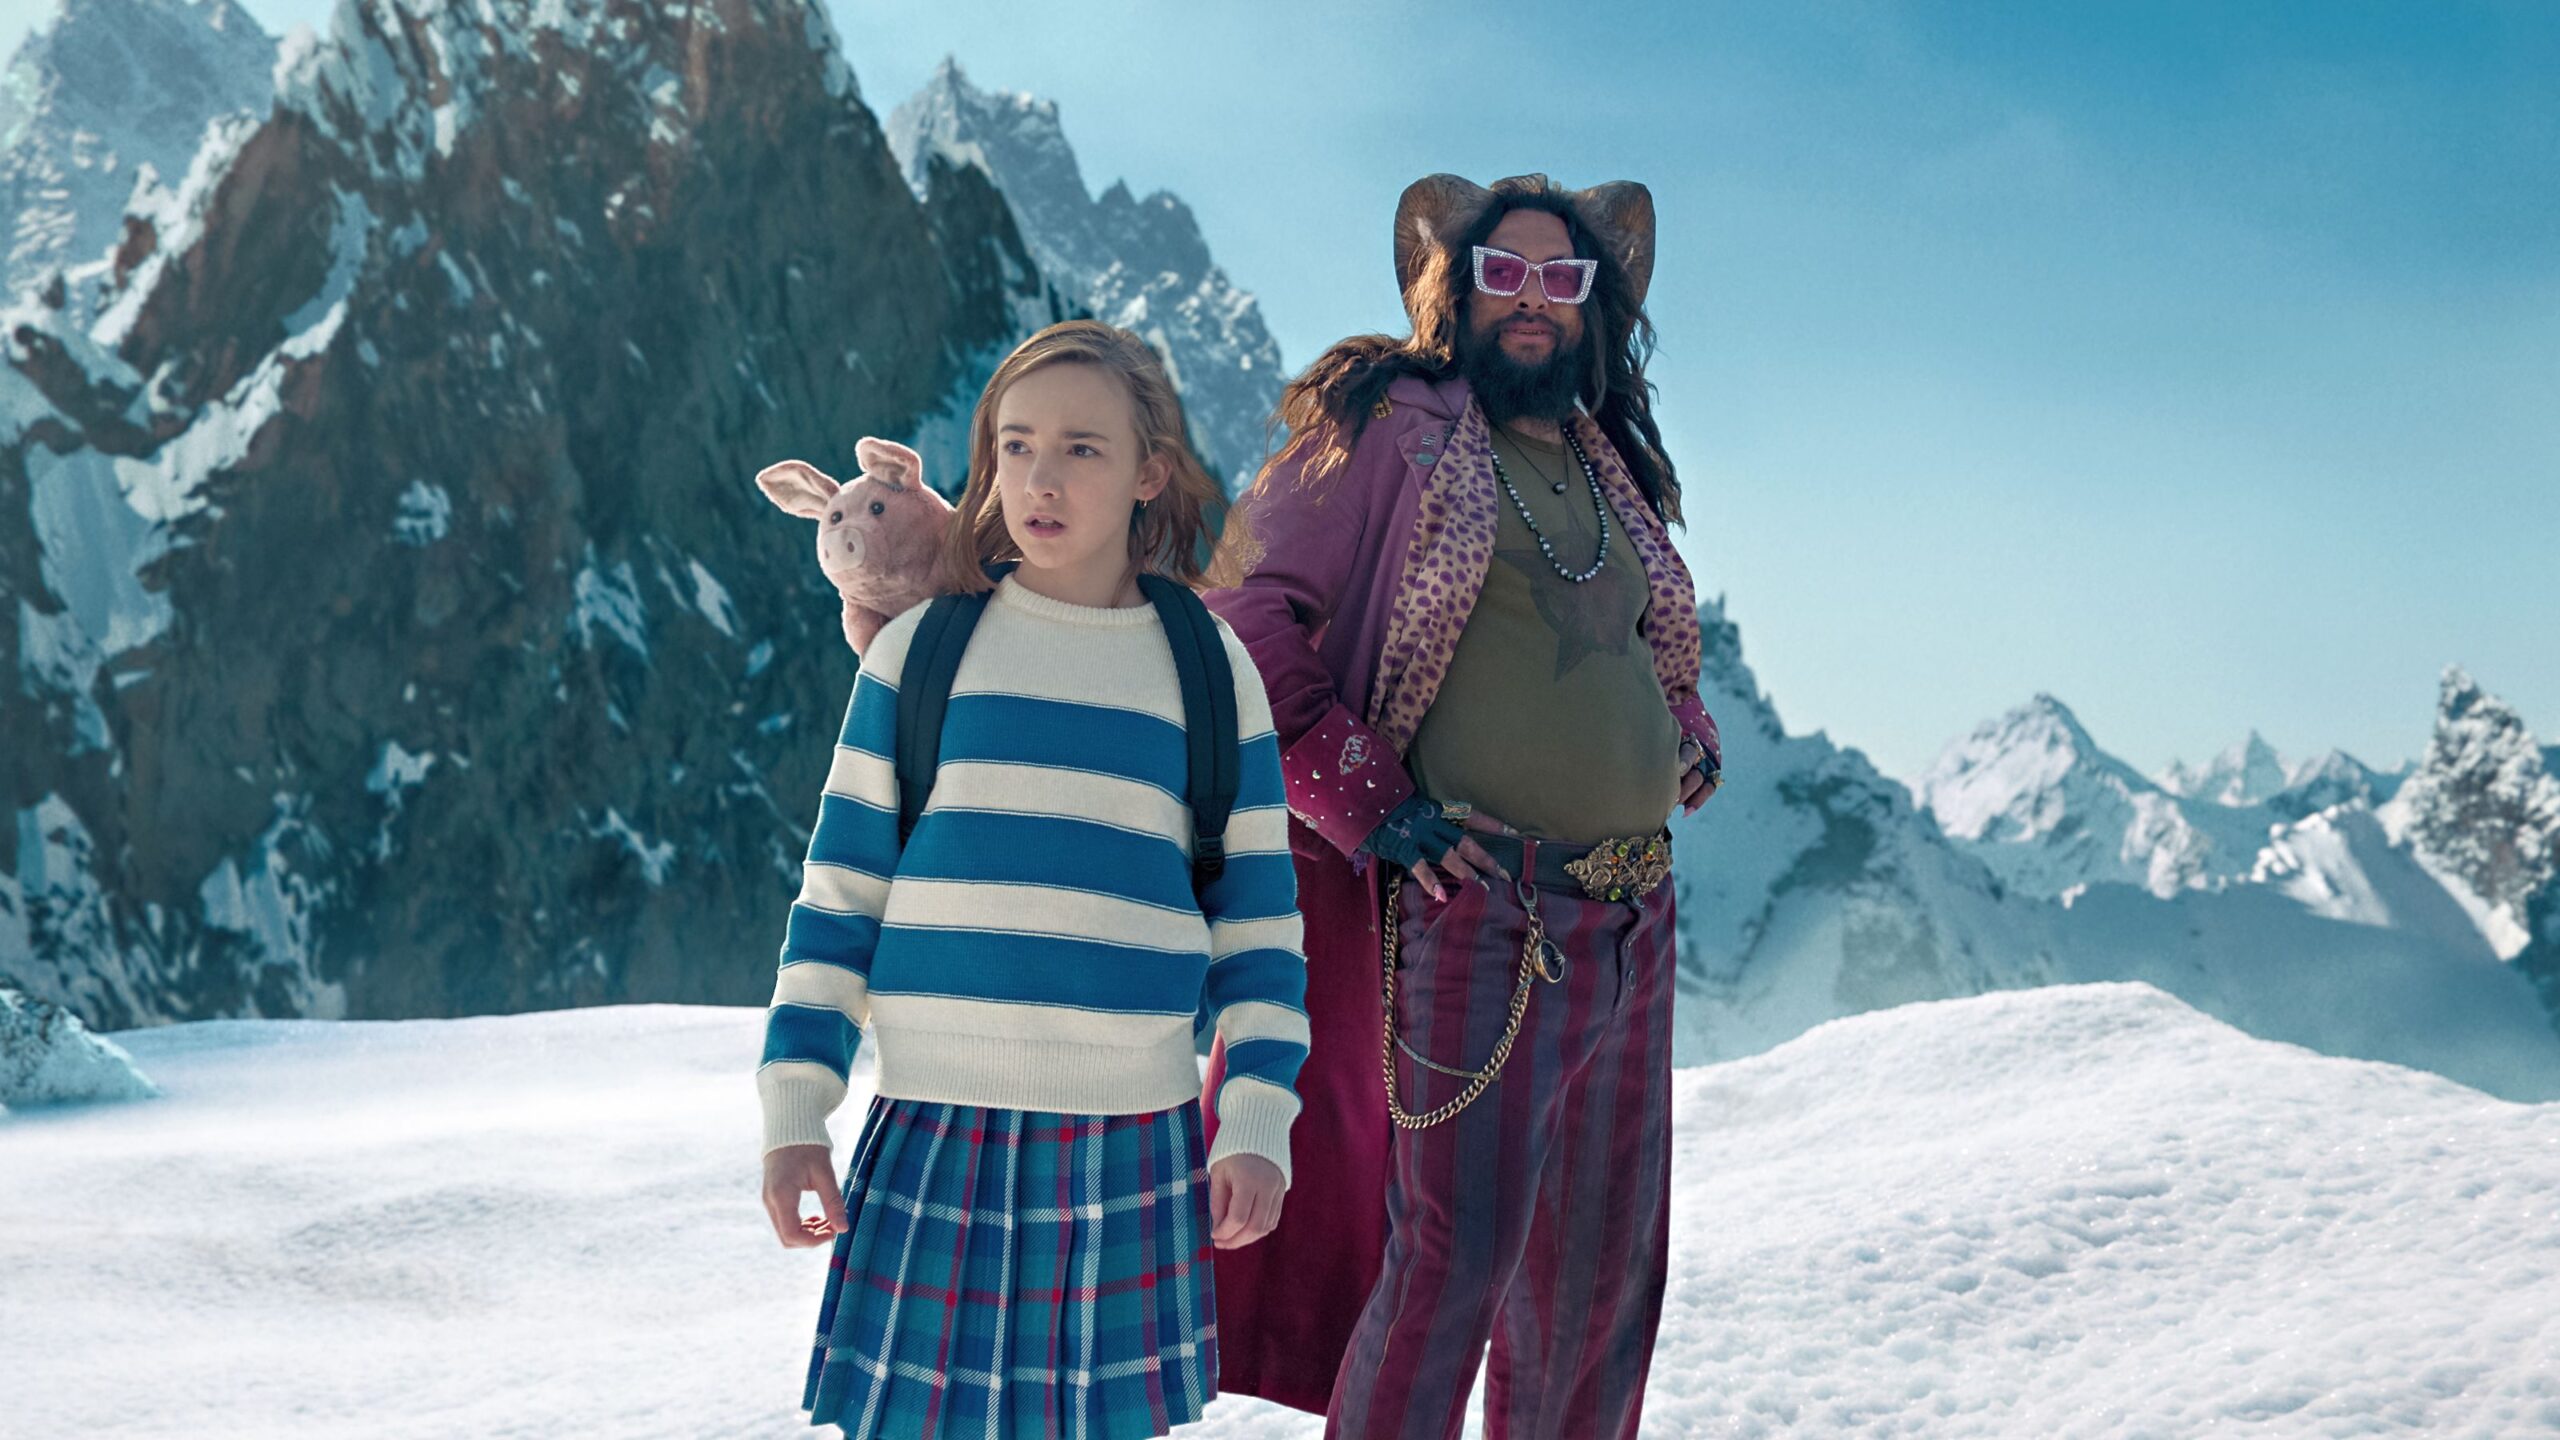 Slumberland in the trailer: With Aquaman and plush piglet into the dream realm!